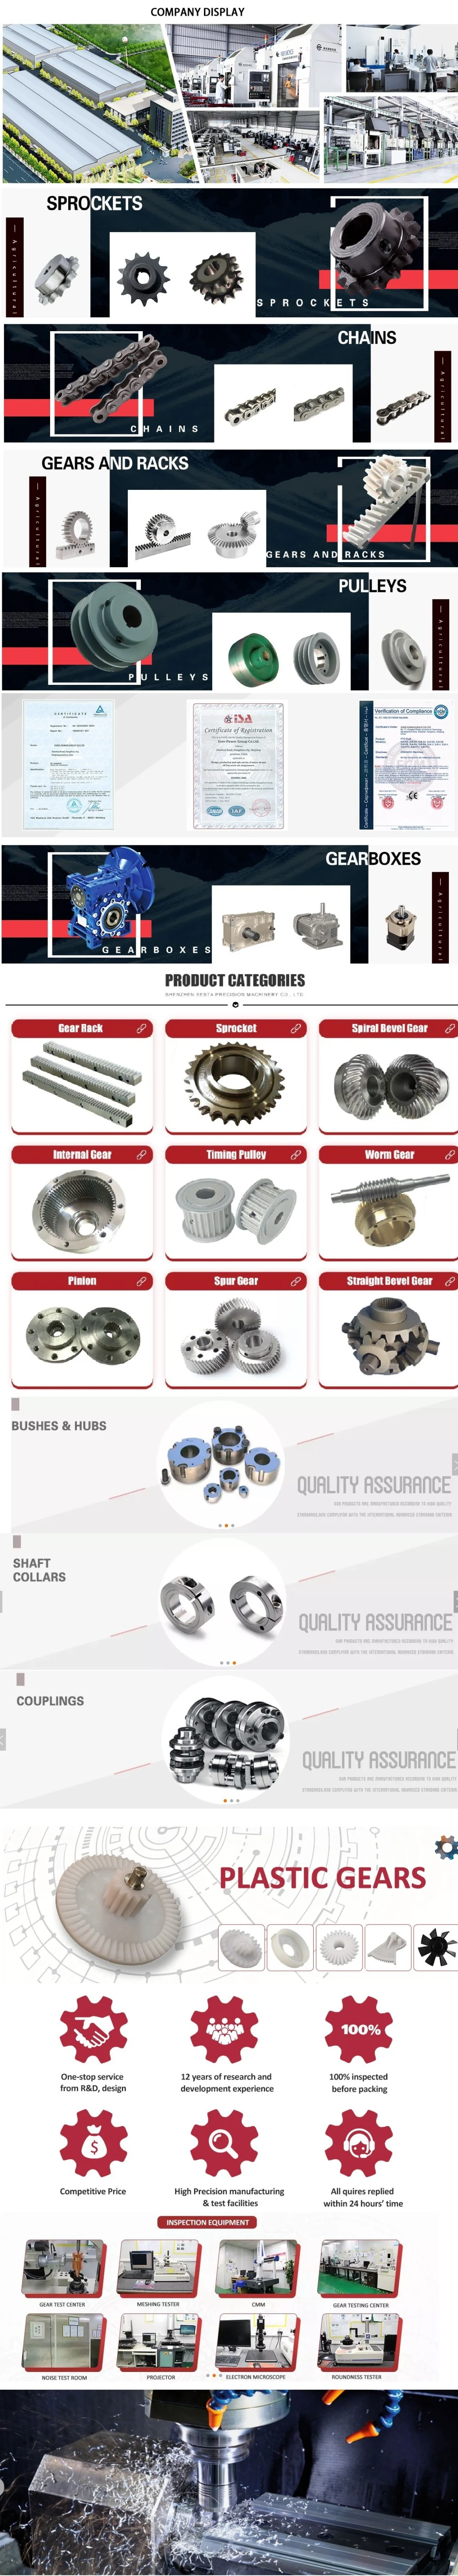 Precision Differential Manufacturers Bevel Spur Helical Straight Forging Dive Stainless Steel Aluminum-Bronze Worm Twin Screw Gears